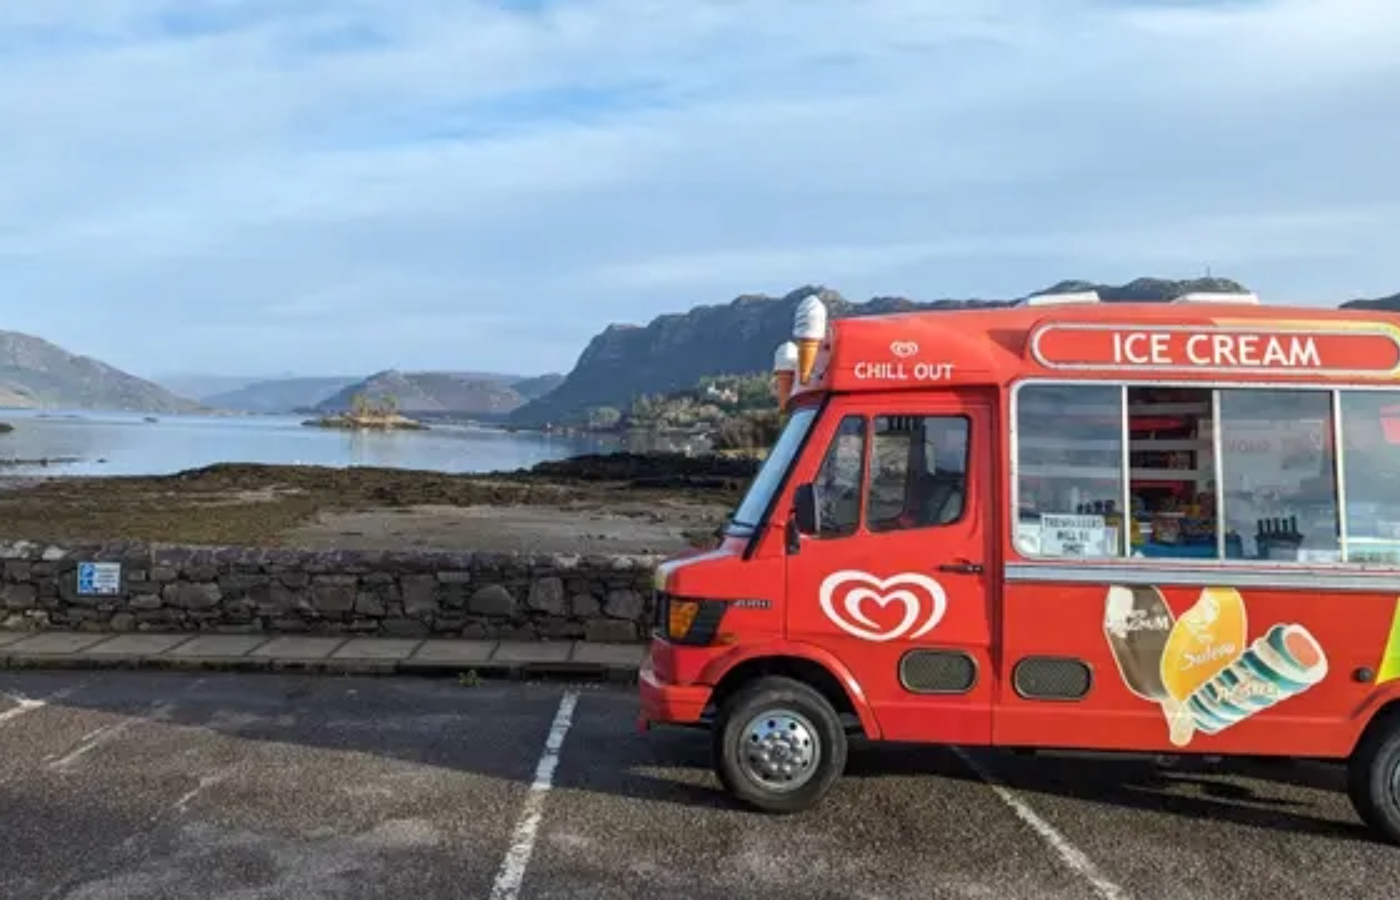 The van is driven around part of the island, starting in Kyleakin and stopping regularly to sell food and household items to locals. Photo: PA Media.